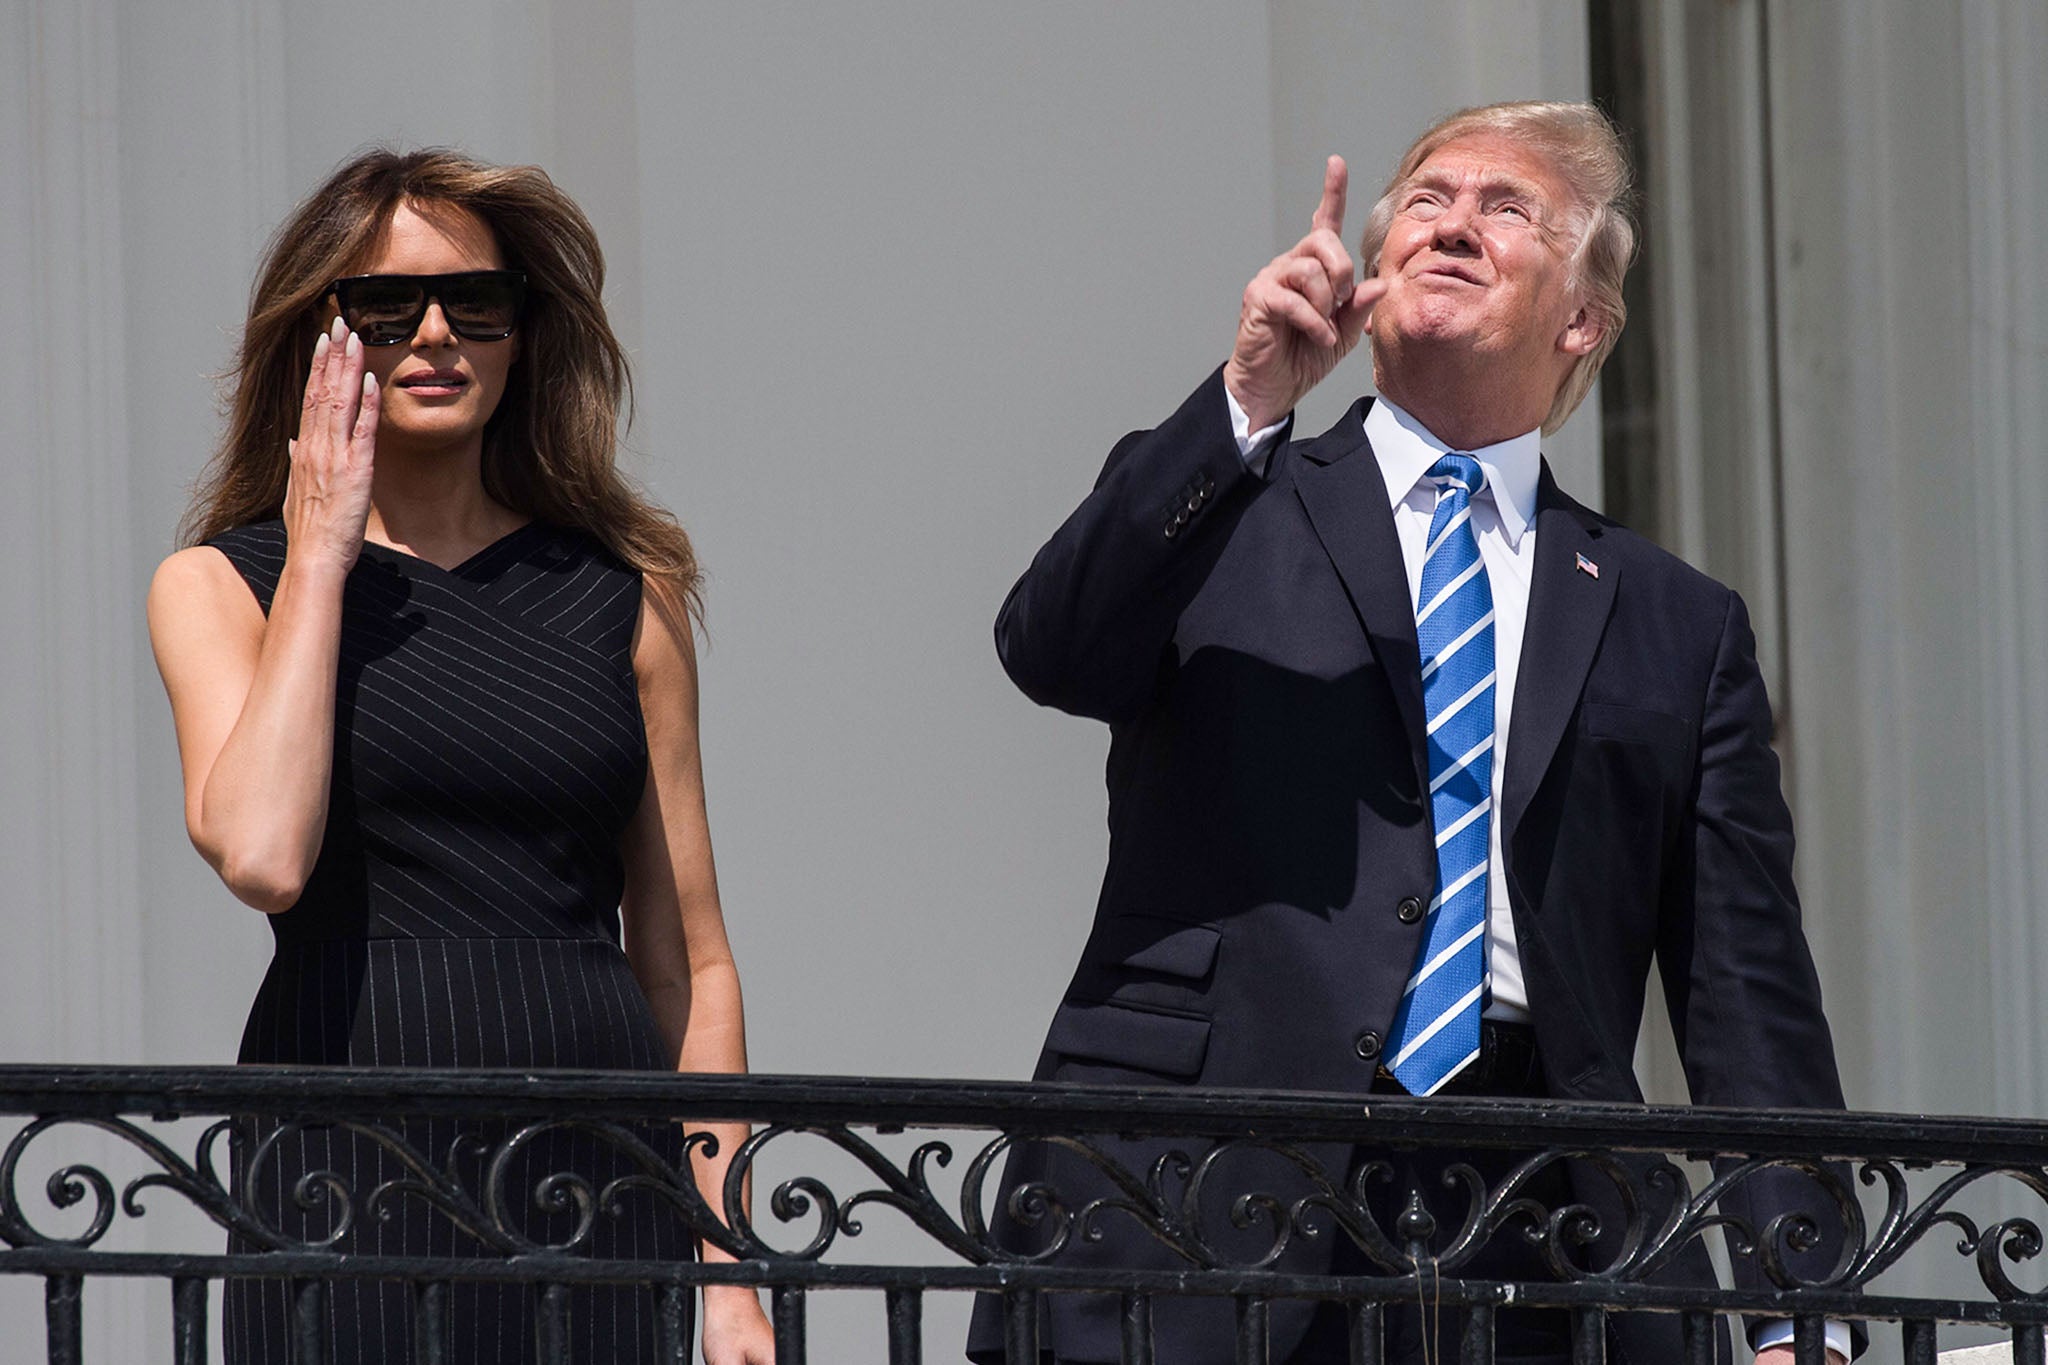 Back in August 2017, the then-president went viral when he ignored all solar safety recommendations by gazing directly at the sun with his naked eyes during the eclipse